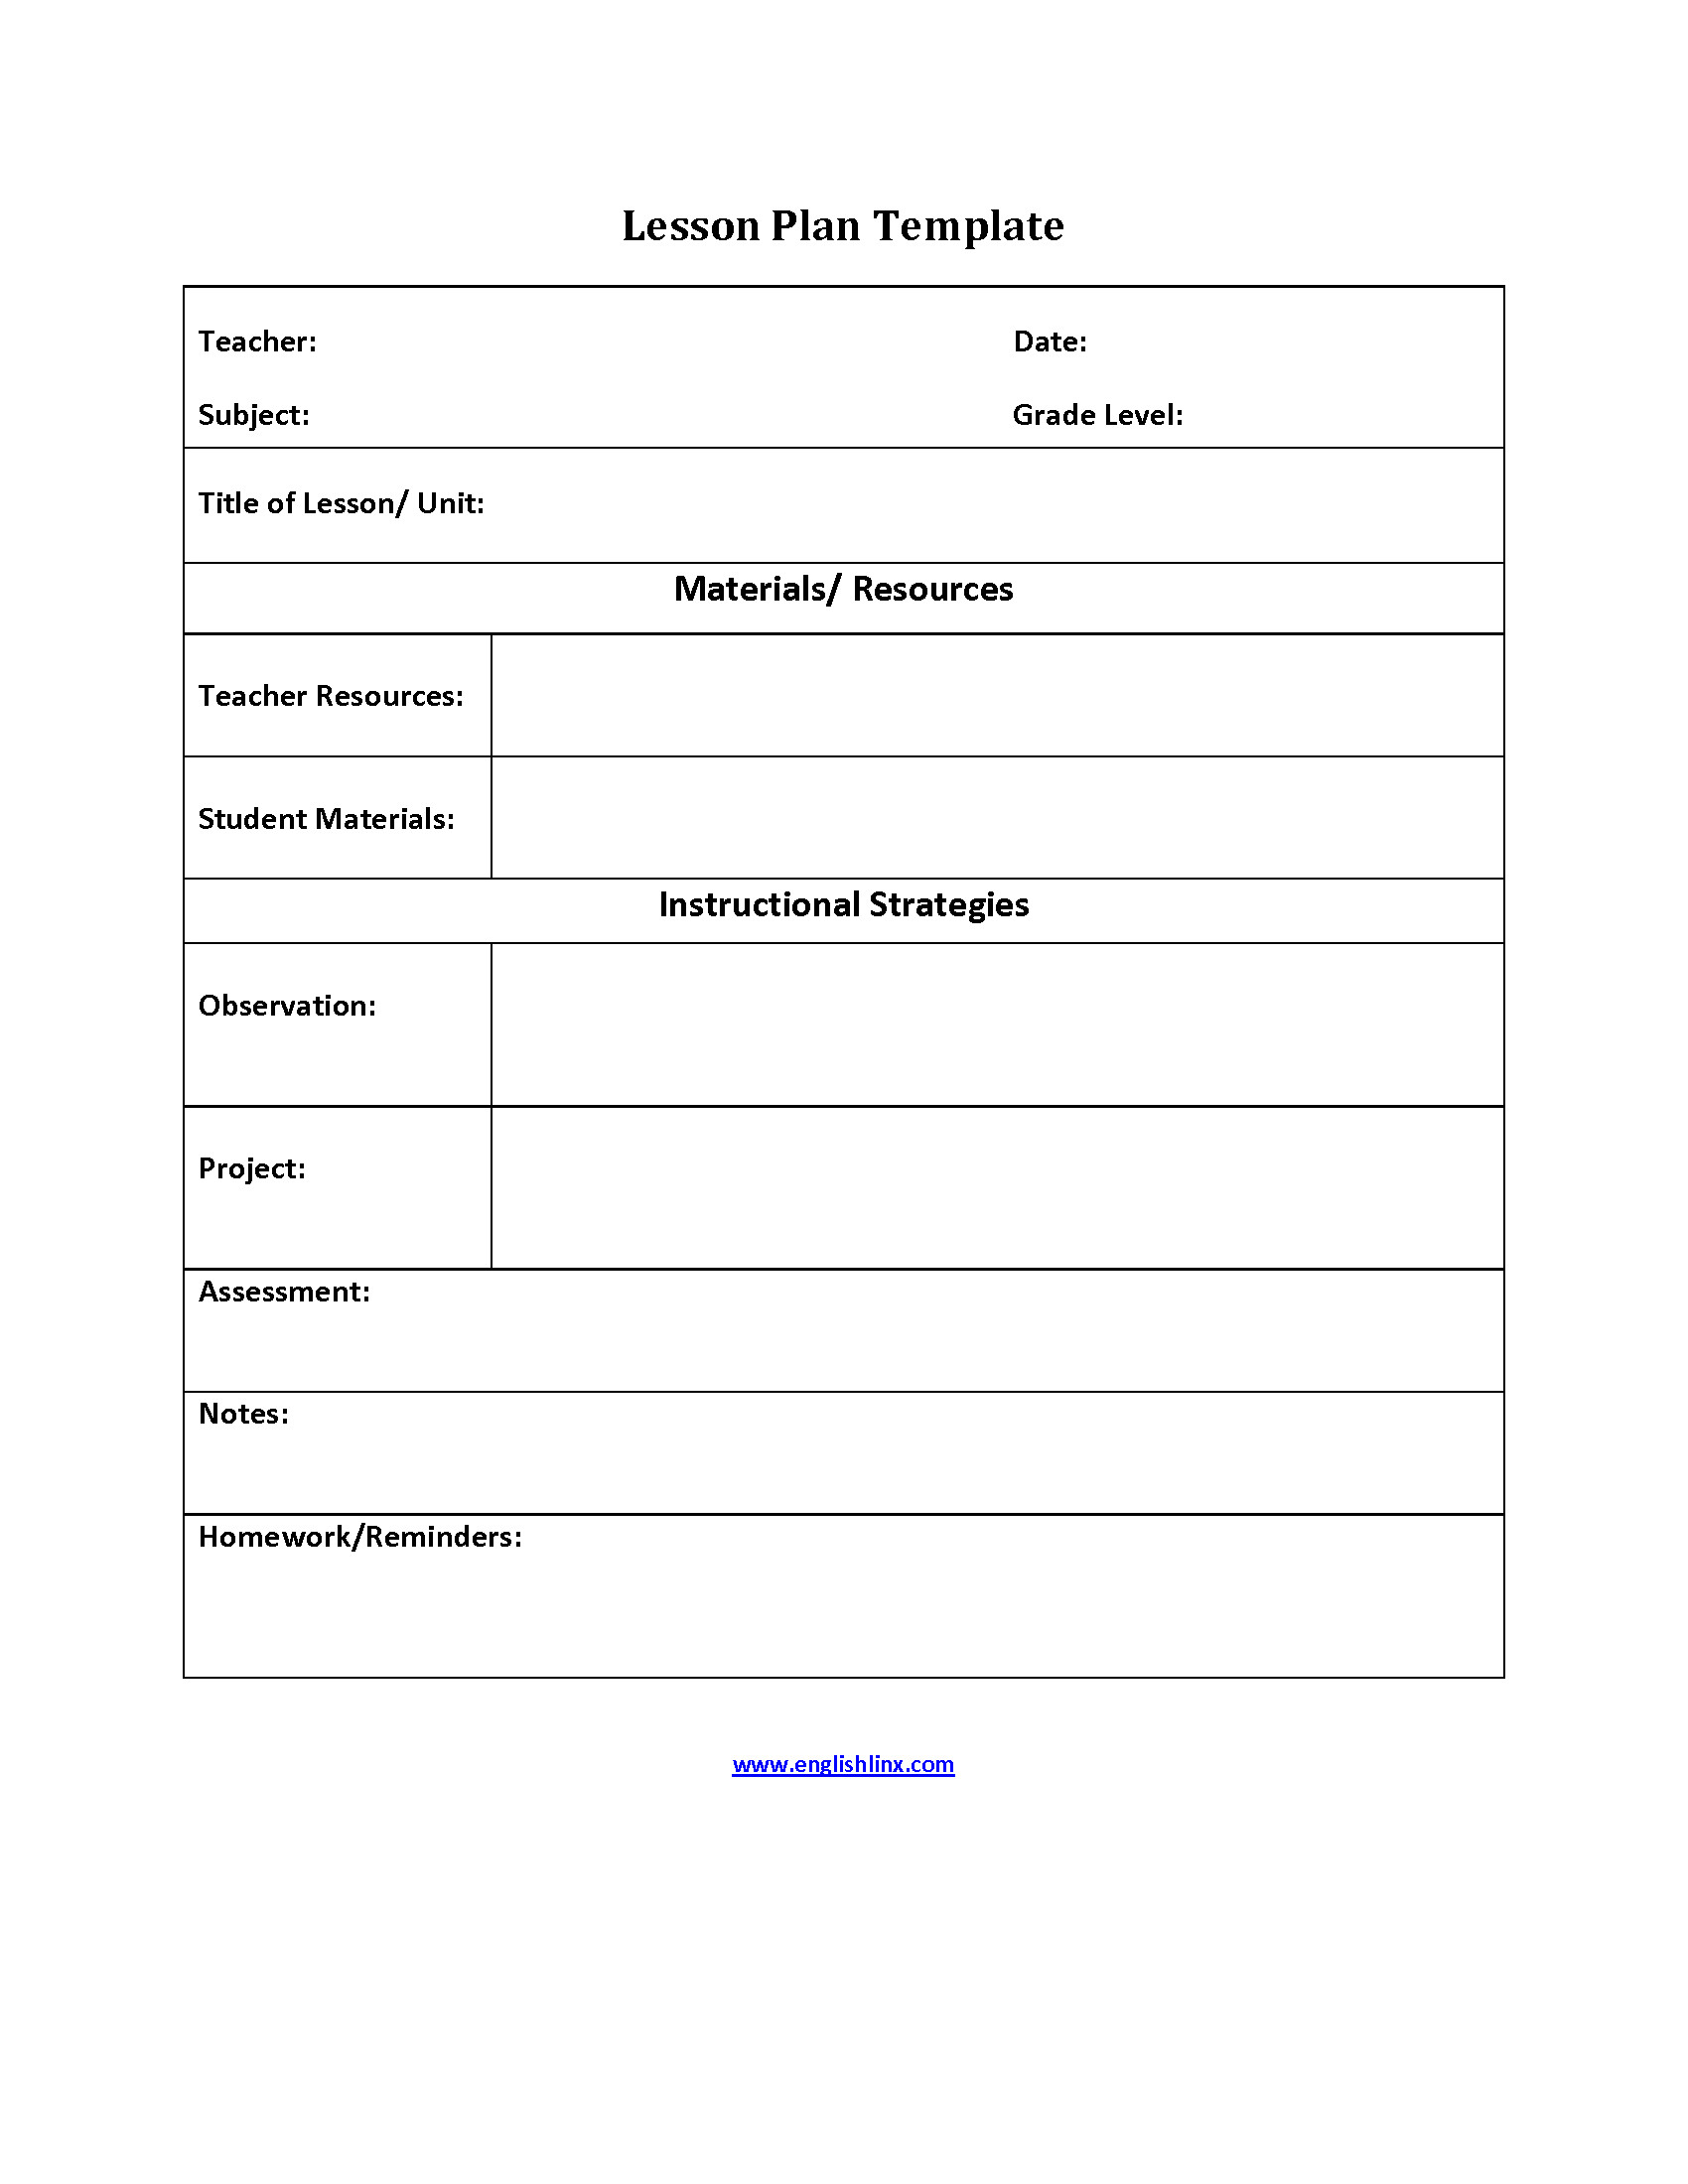 Easy Lesson Plan Template Lesson Plan Template